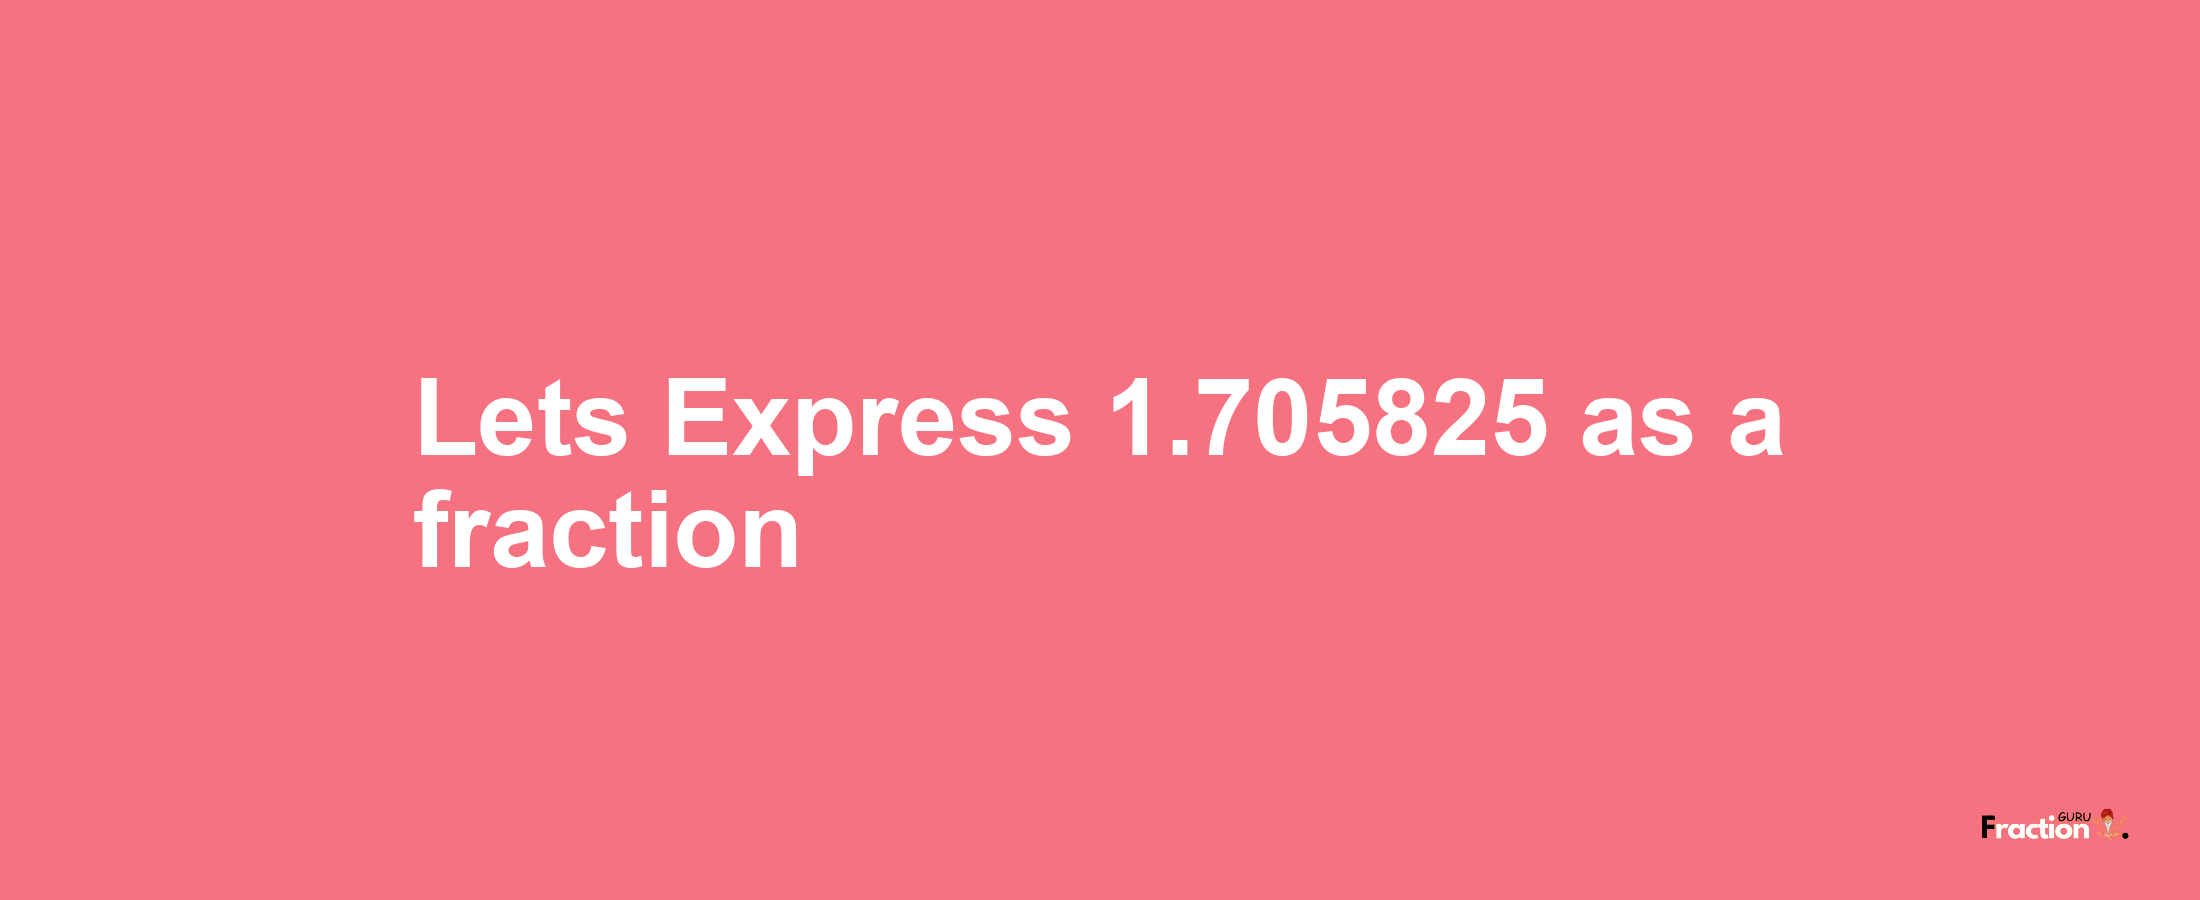 Lets Express 1.705825 as afraction